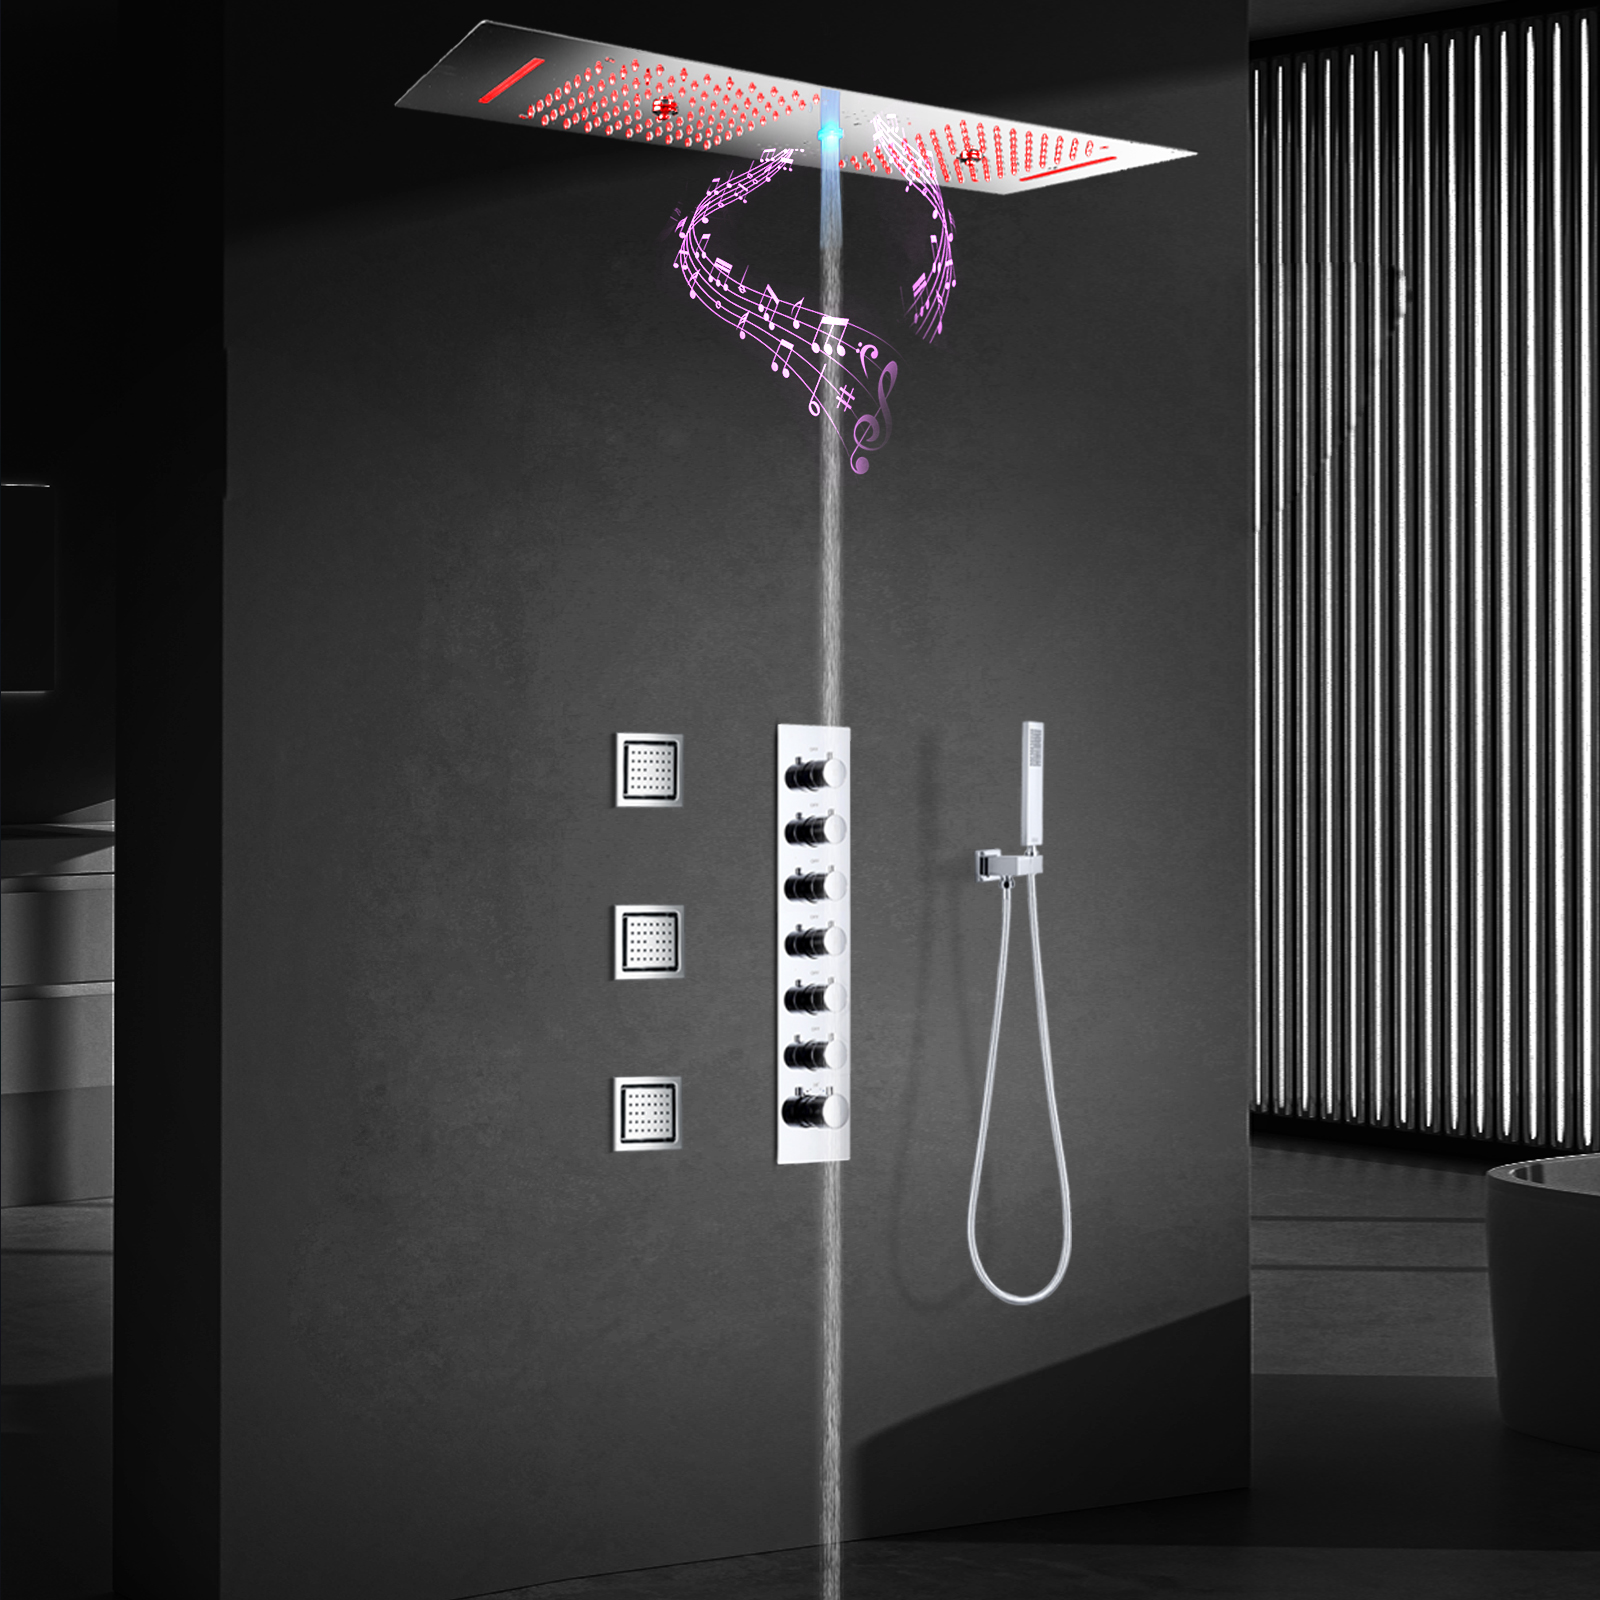 LED Chrome Polished Shower Head with Rainfall Faucet Nozzle Ceiling Recessed Bathroom Thermostatic Shower Faucet Set